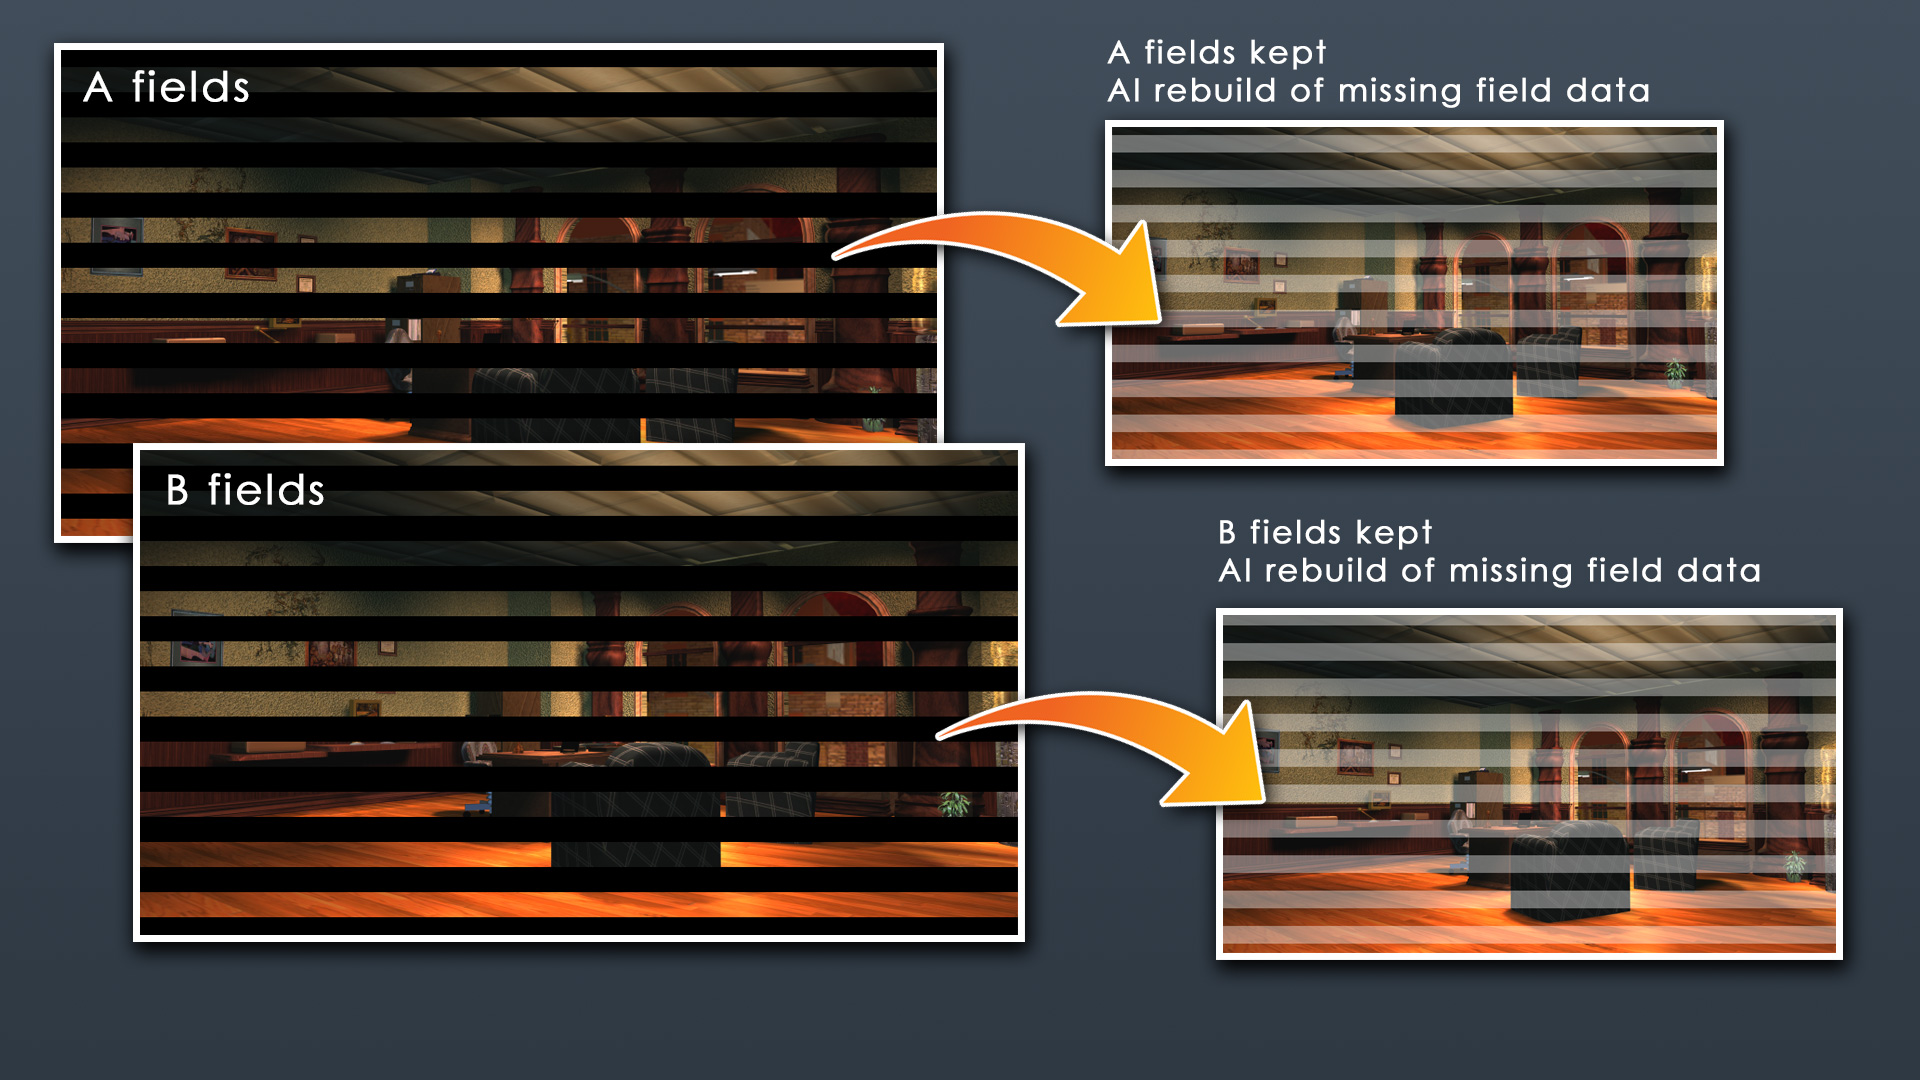 Image detailing how using both A fields and B fields to perform upscaling results in 60 fps output but not discarding any fields.